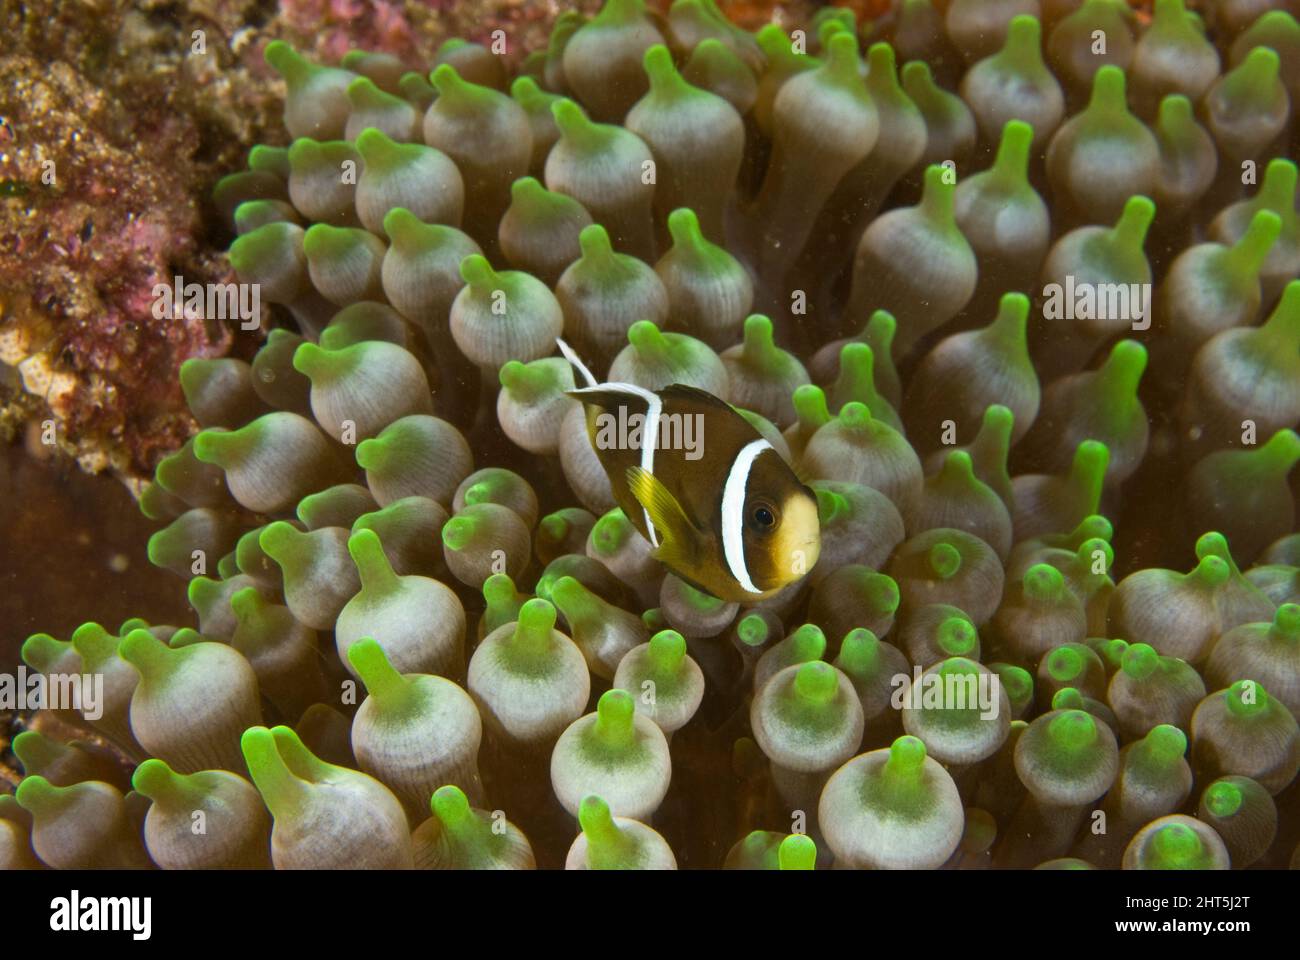 Clark's anemonefish  (Amphiprion clarkii), juvenile in its host, Bubbletip anemone, also called Bulb-tentacle sea anemone (Entacmaea quadricolor). Stock Photo